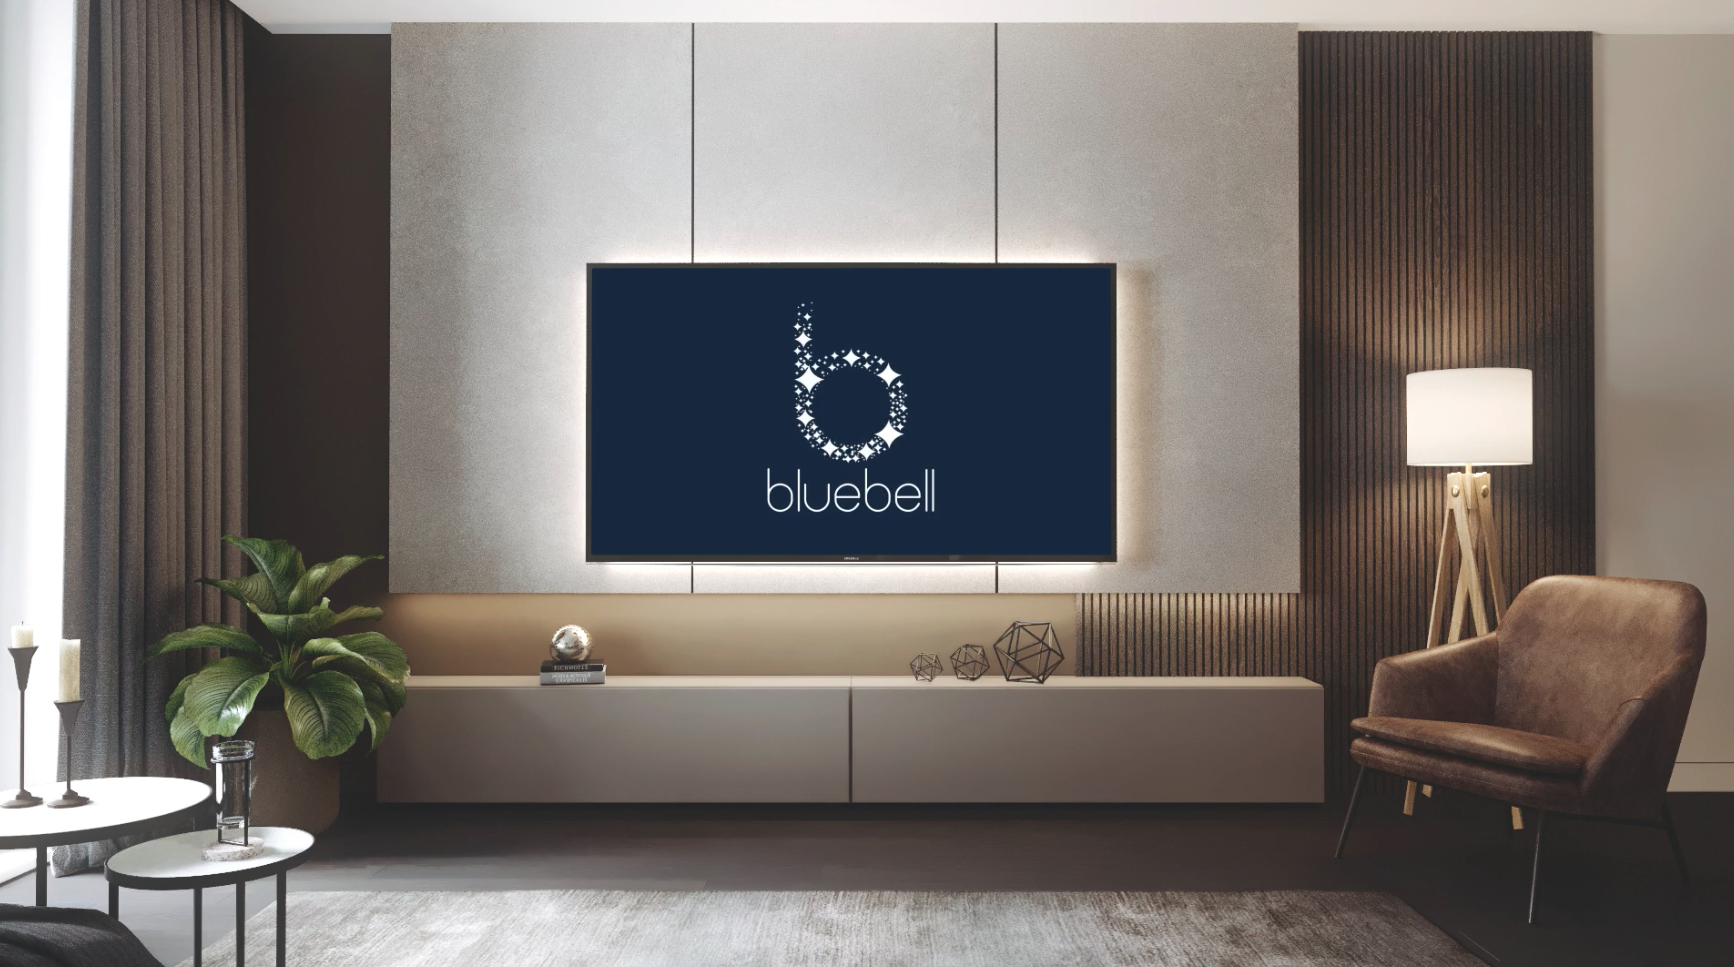 bluebell fitted furniture video thumbnail